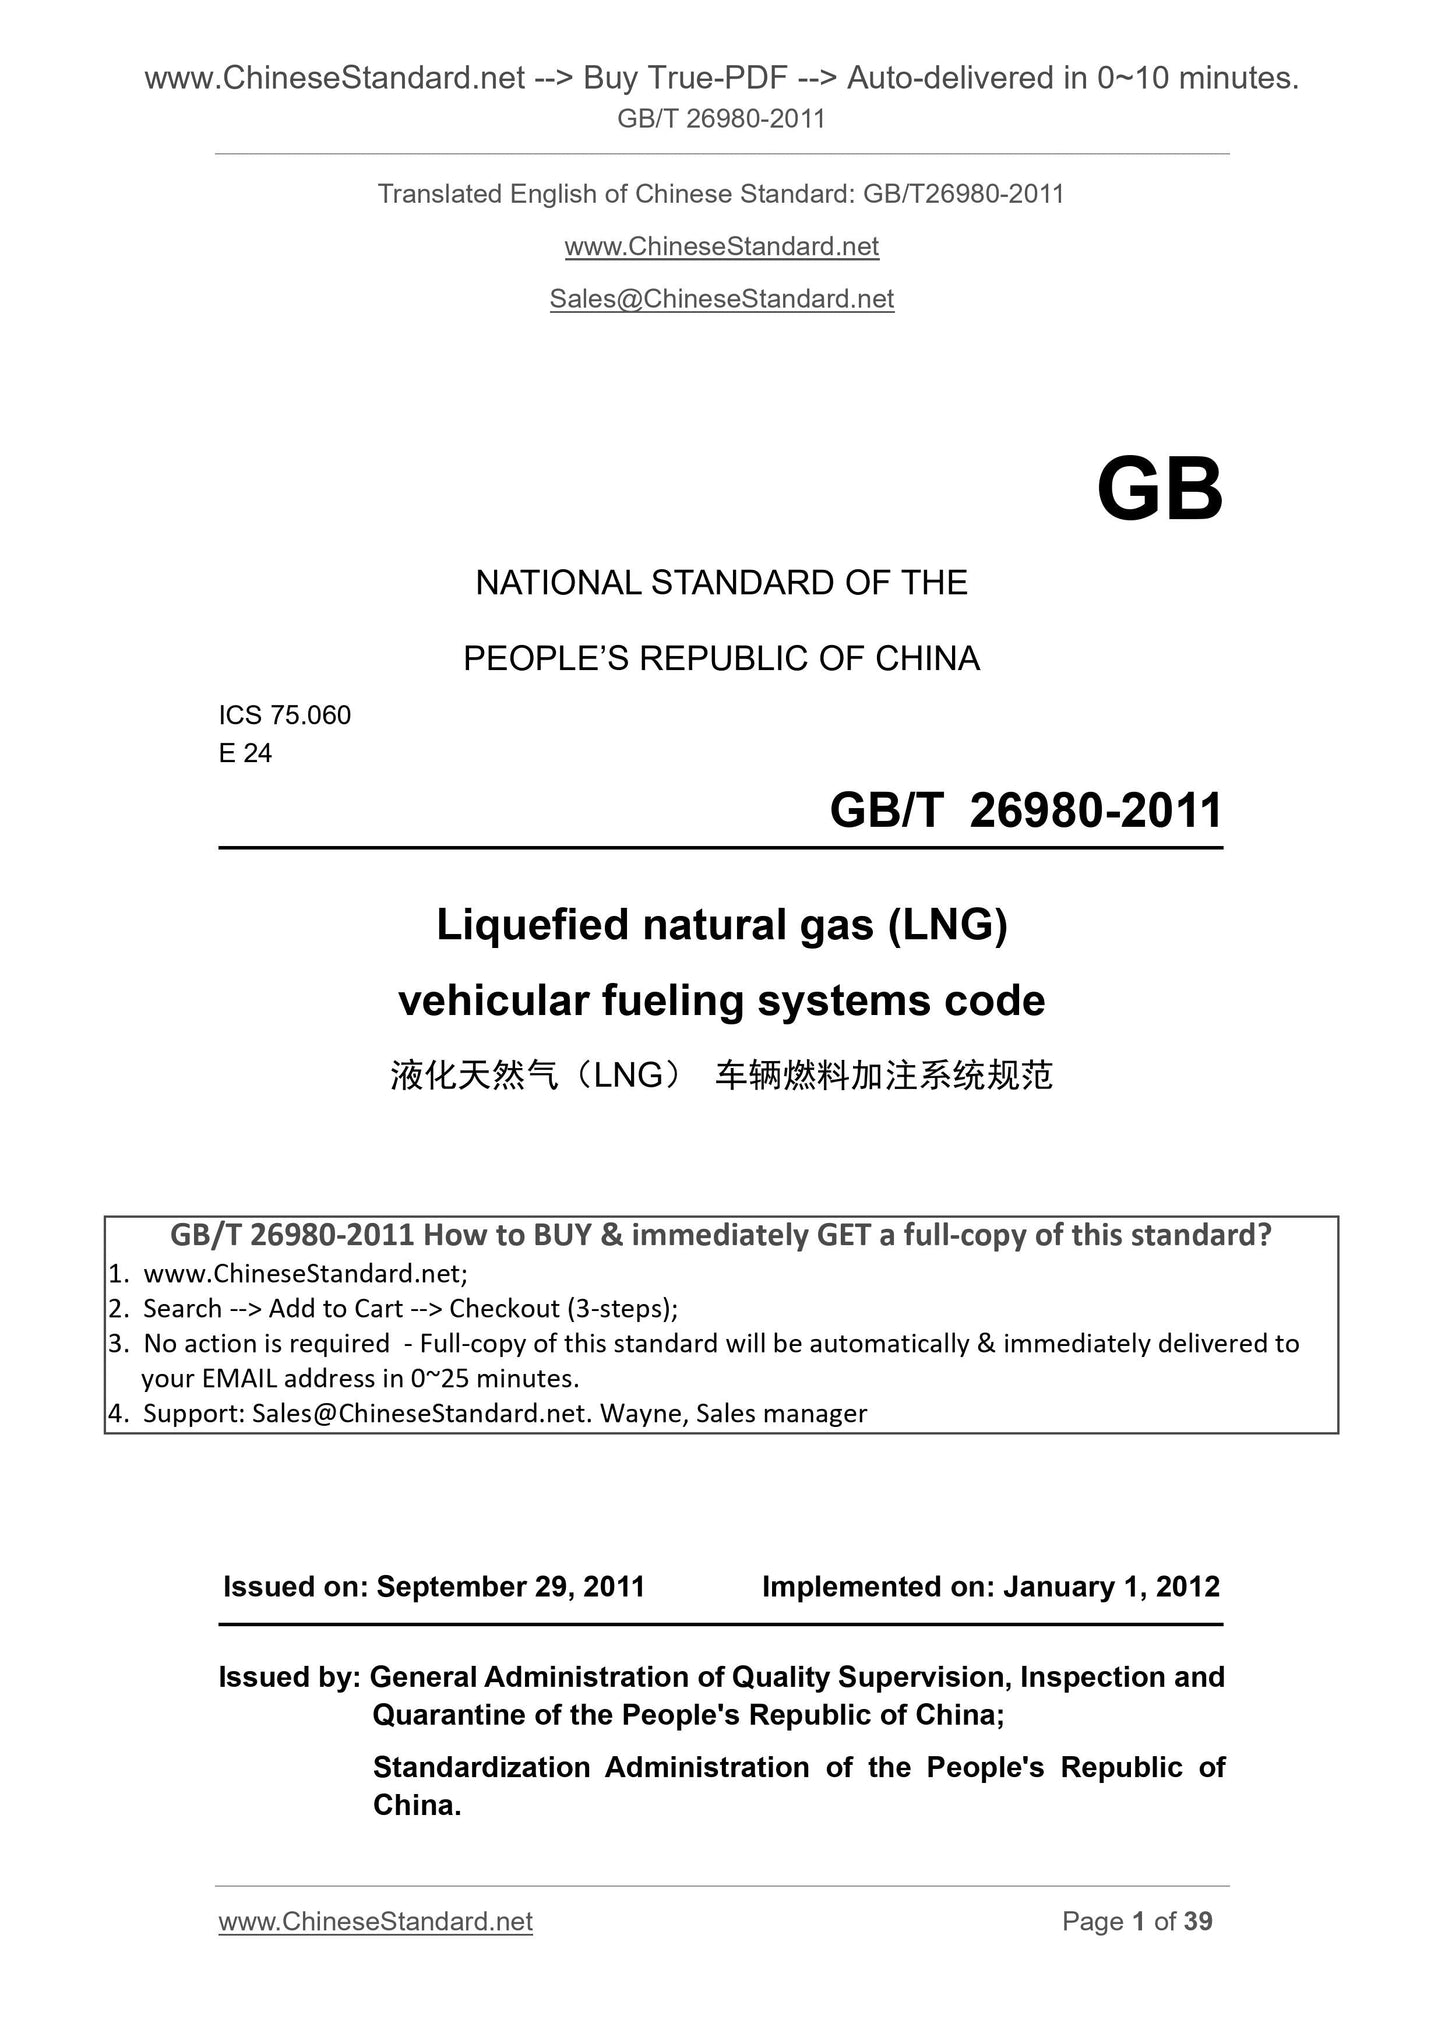 GB/T 26980-2011 Page 1